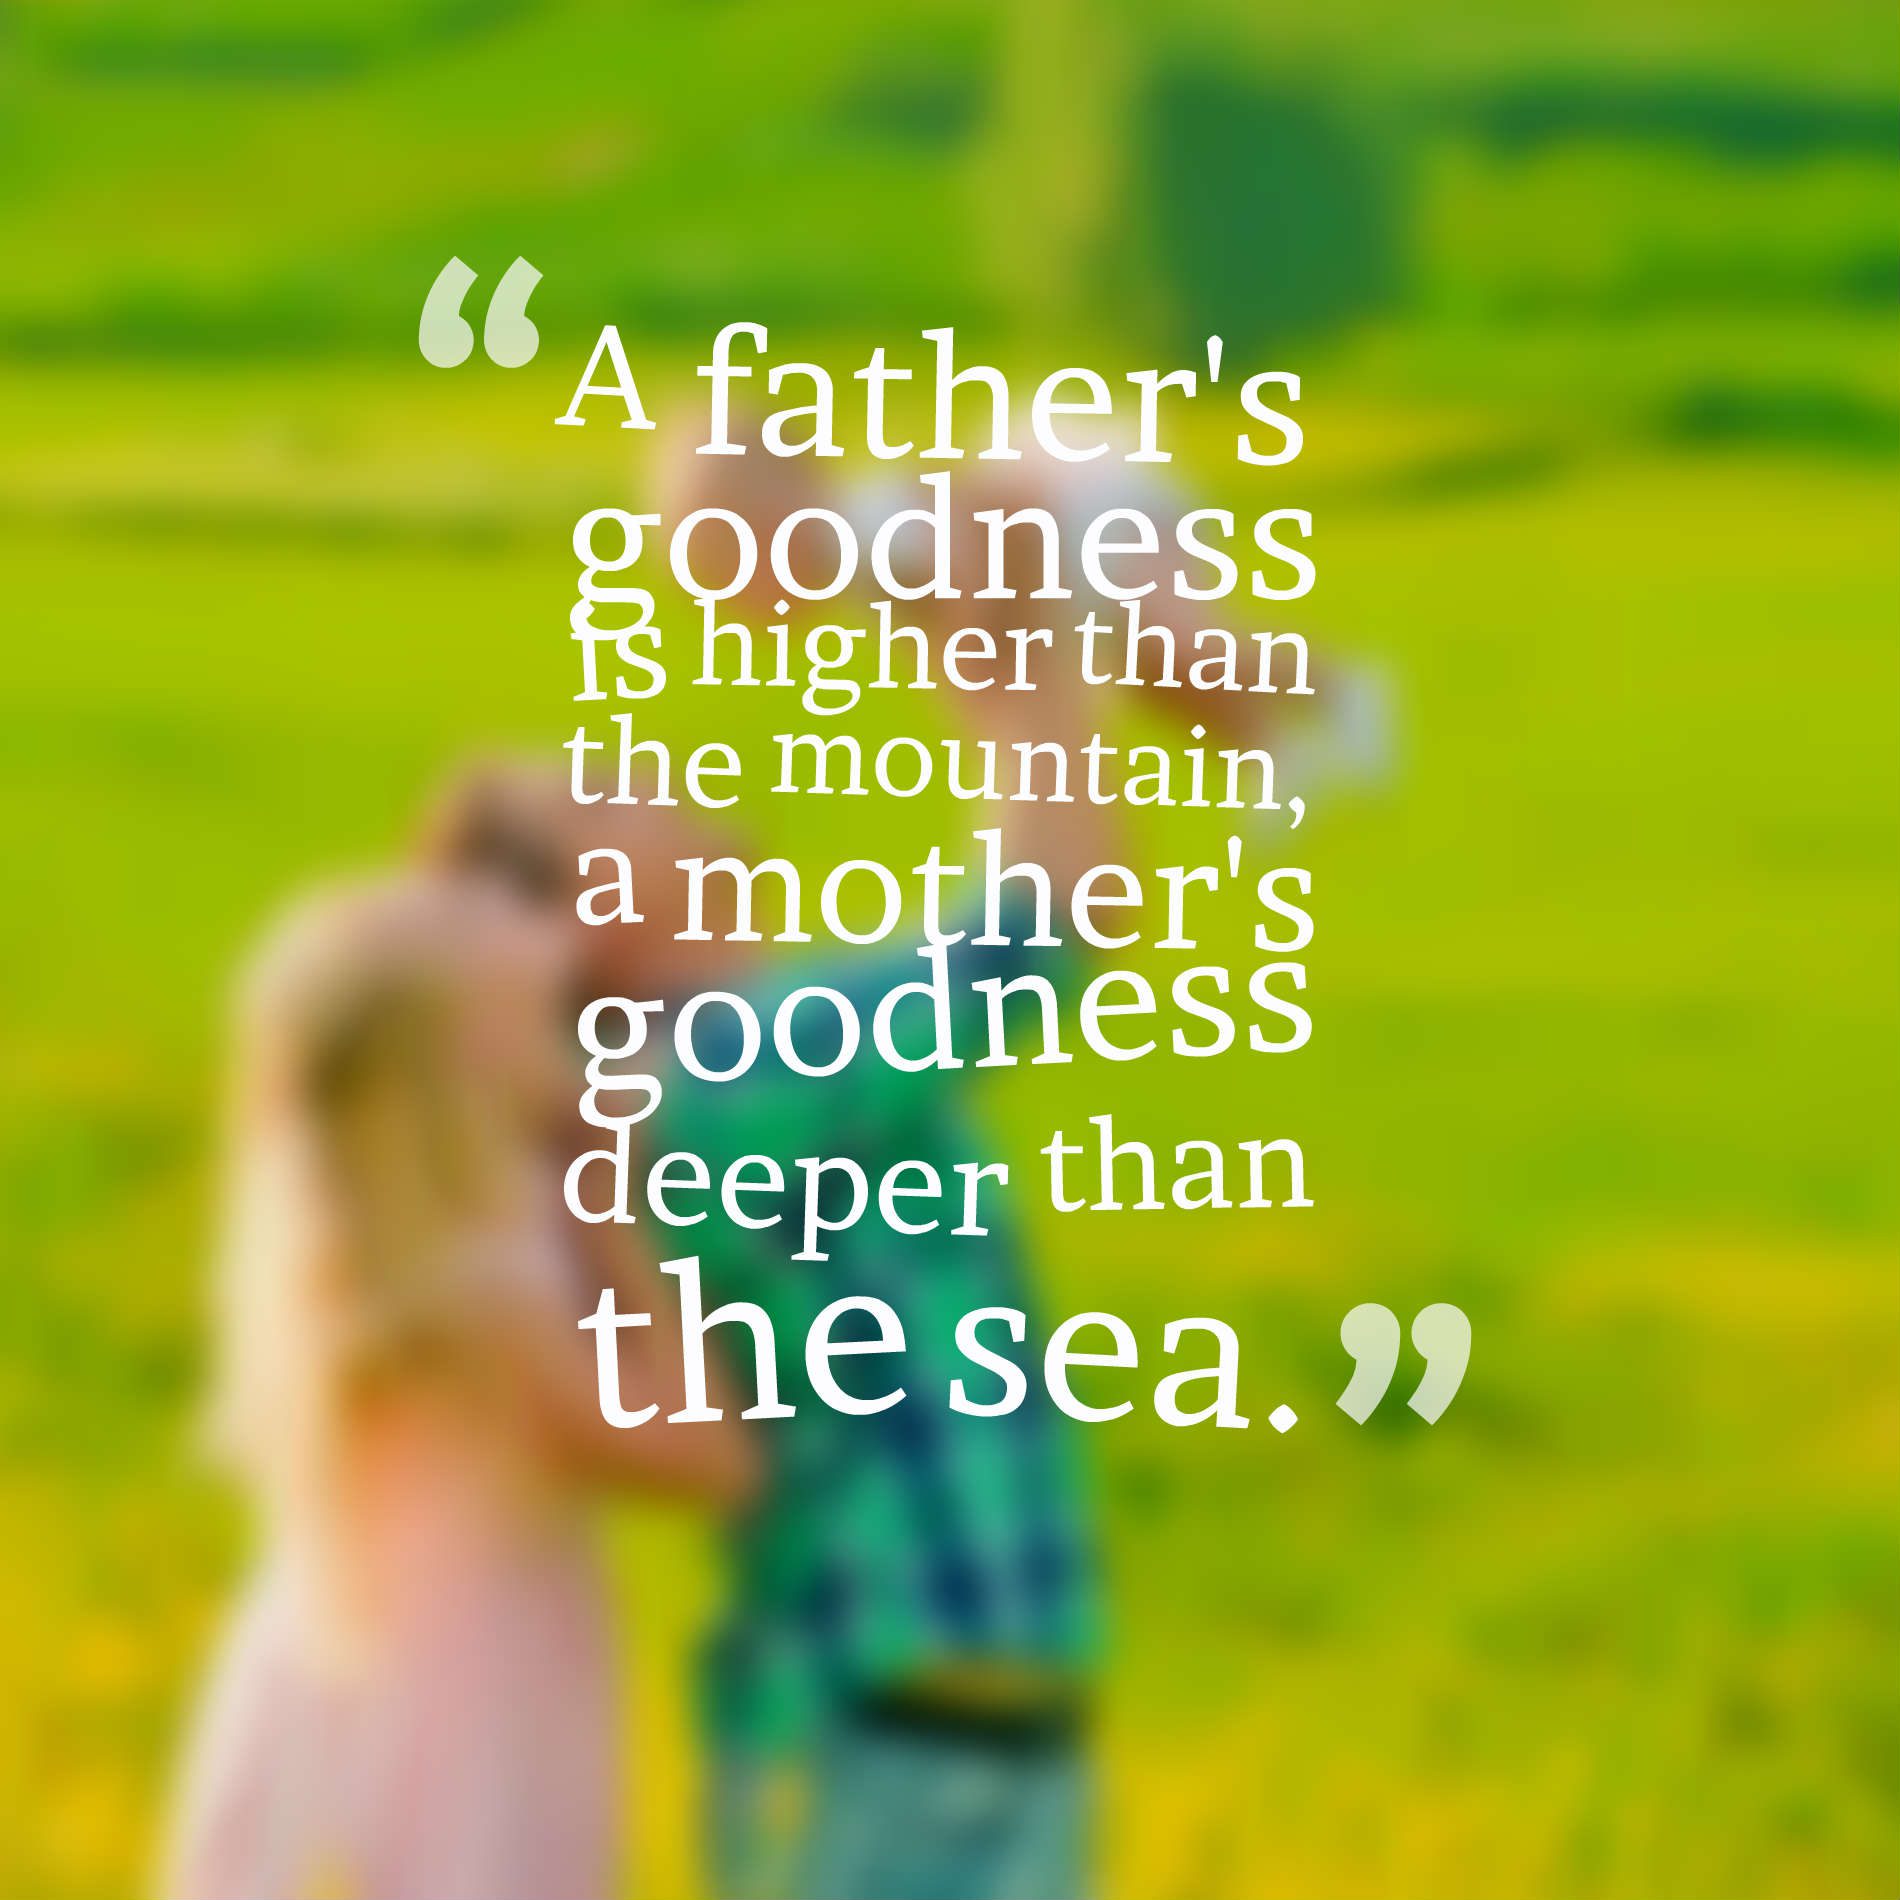 A father's goodness is higher than the mountain, a mother's goodness deeper than the sea.